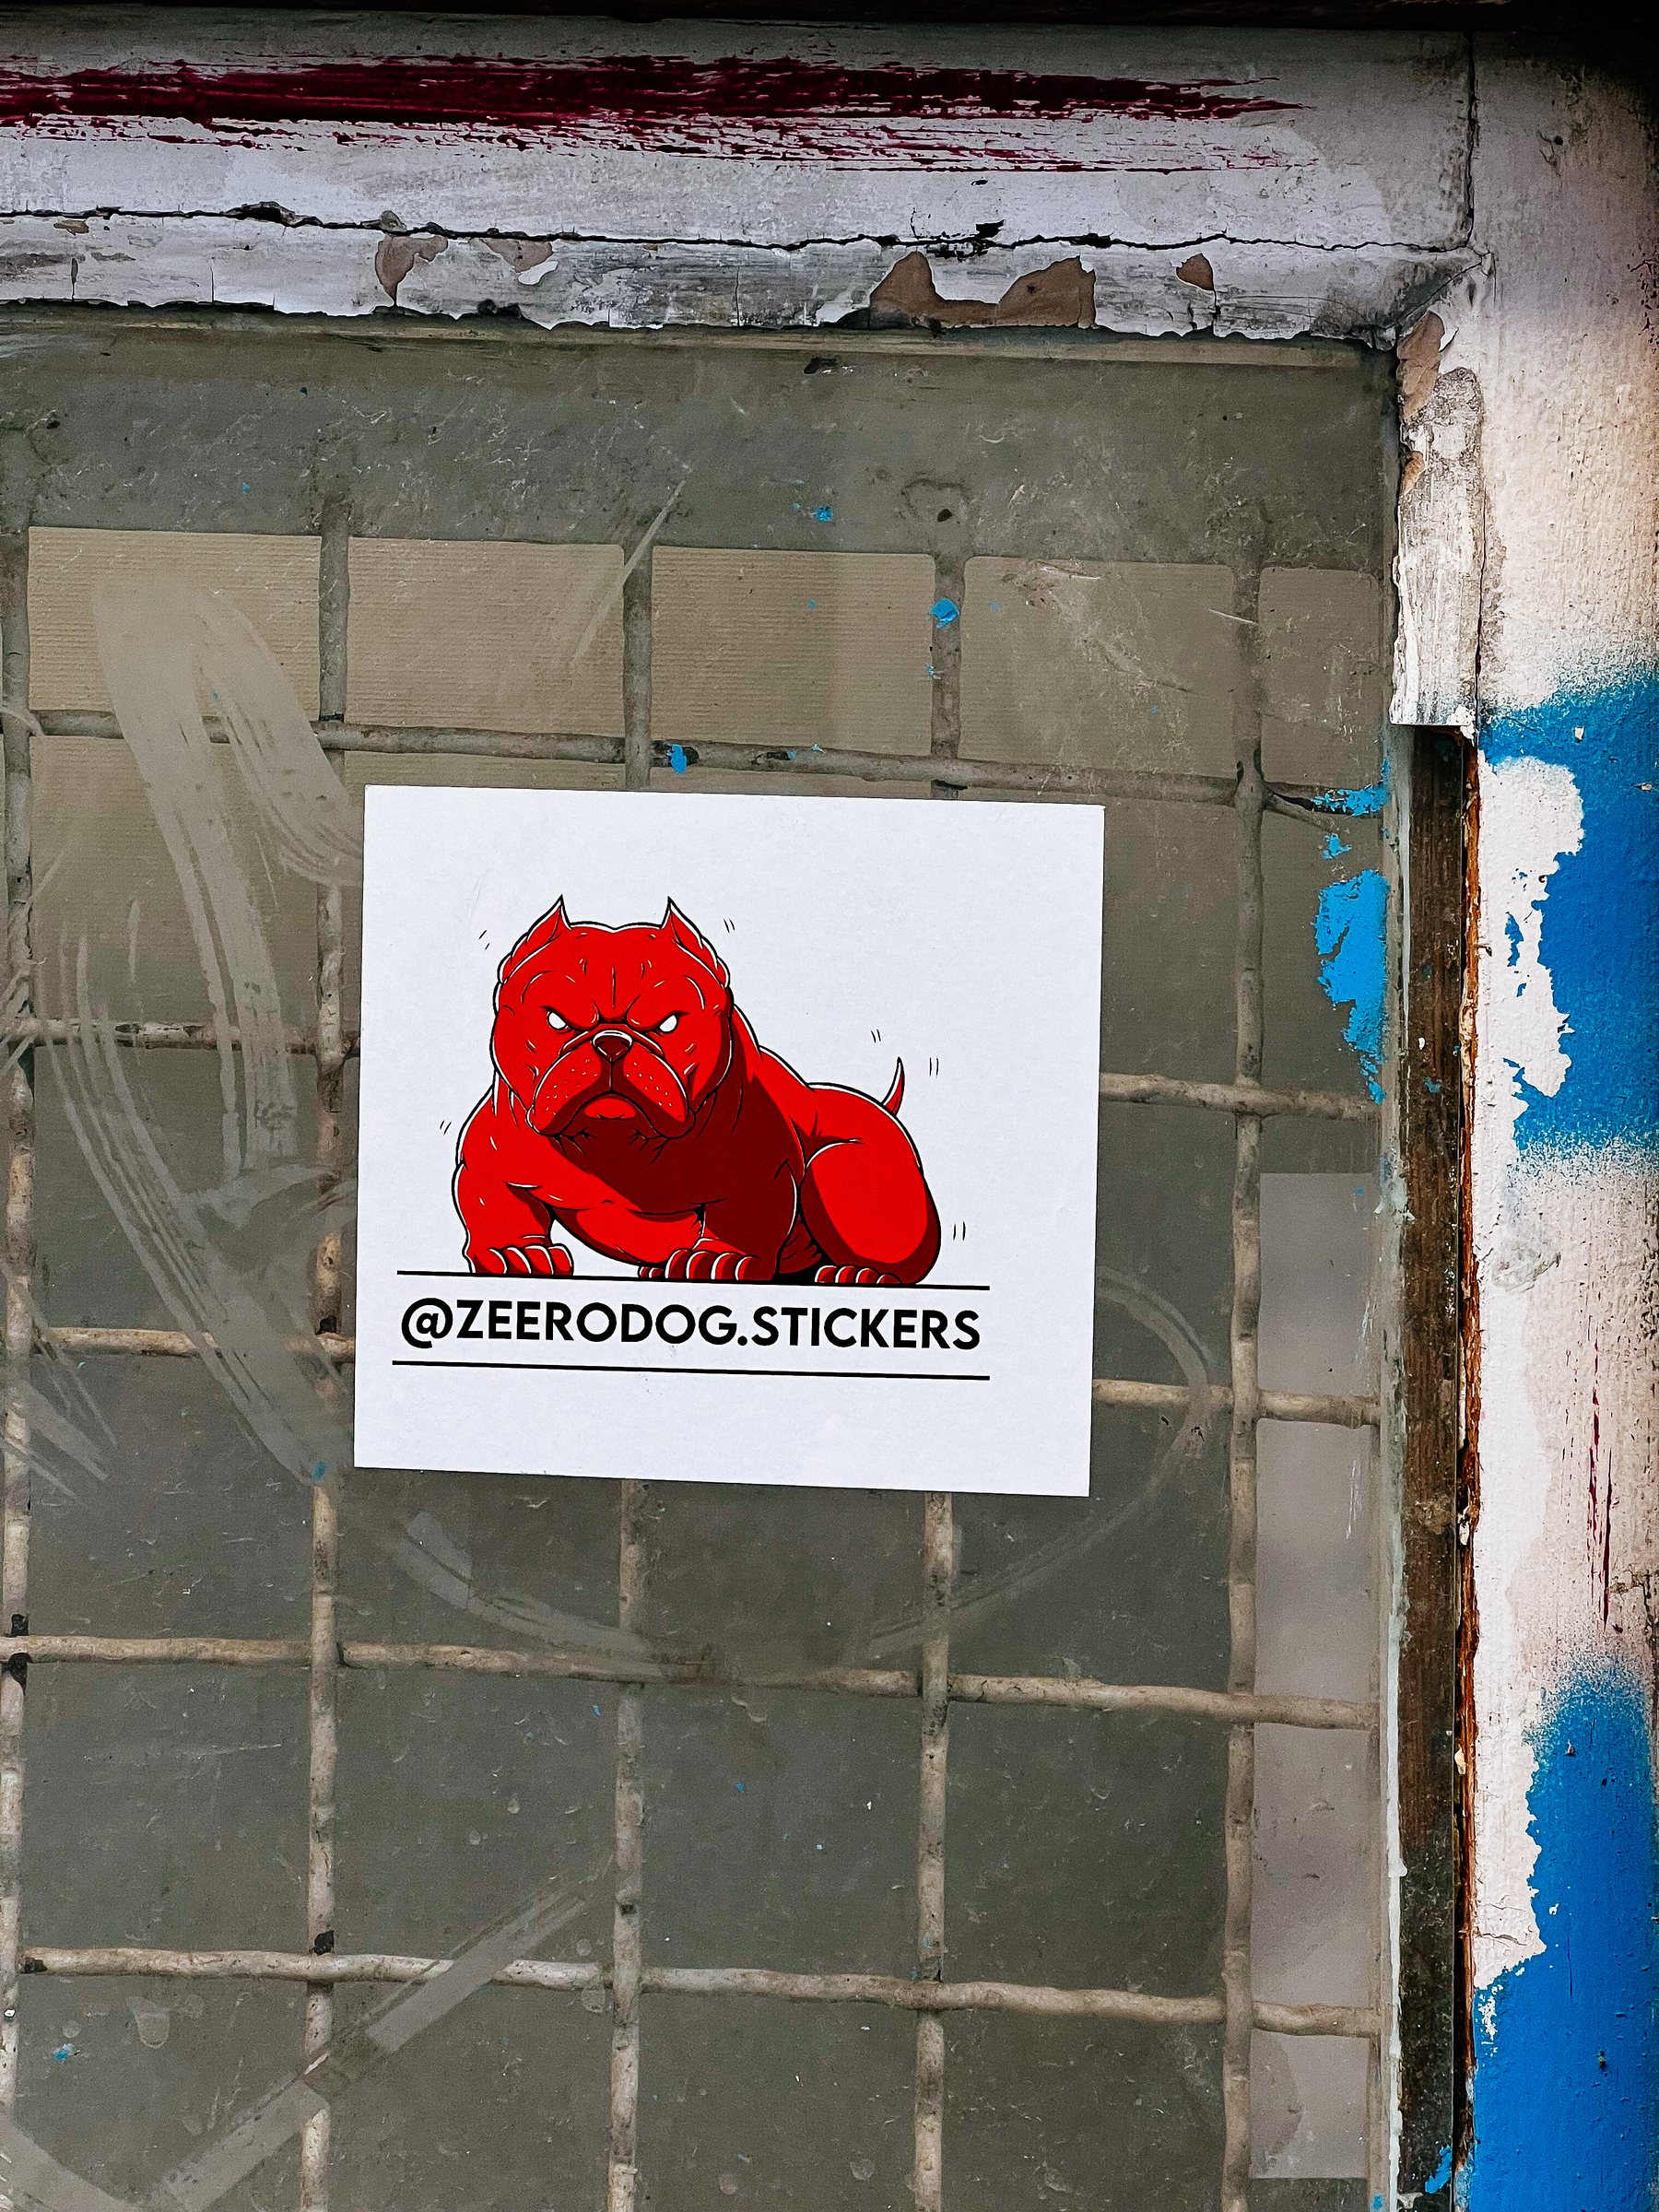 Sticker for zeerodog stickers. A drawing of a red devilish bulldog.